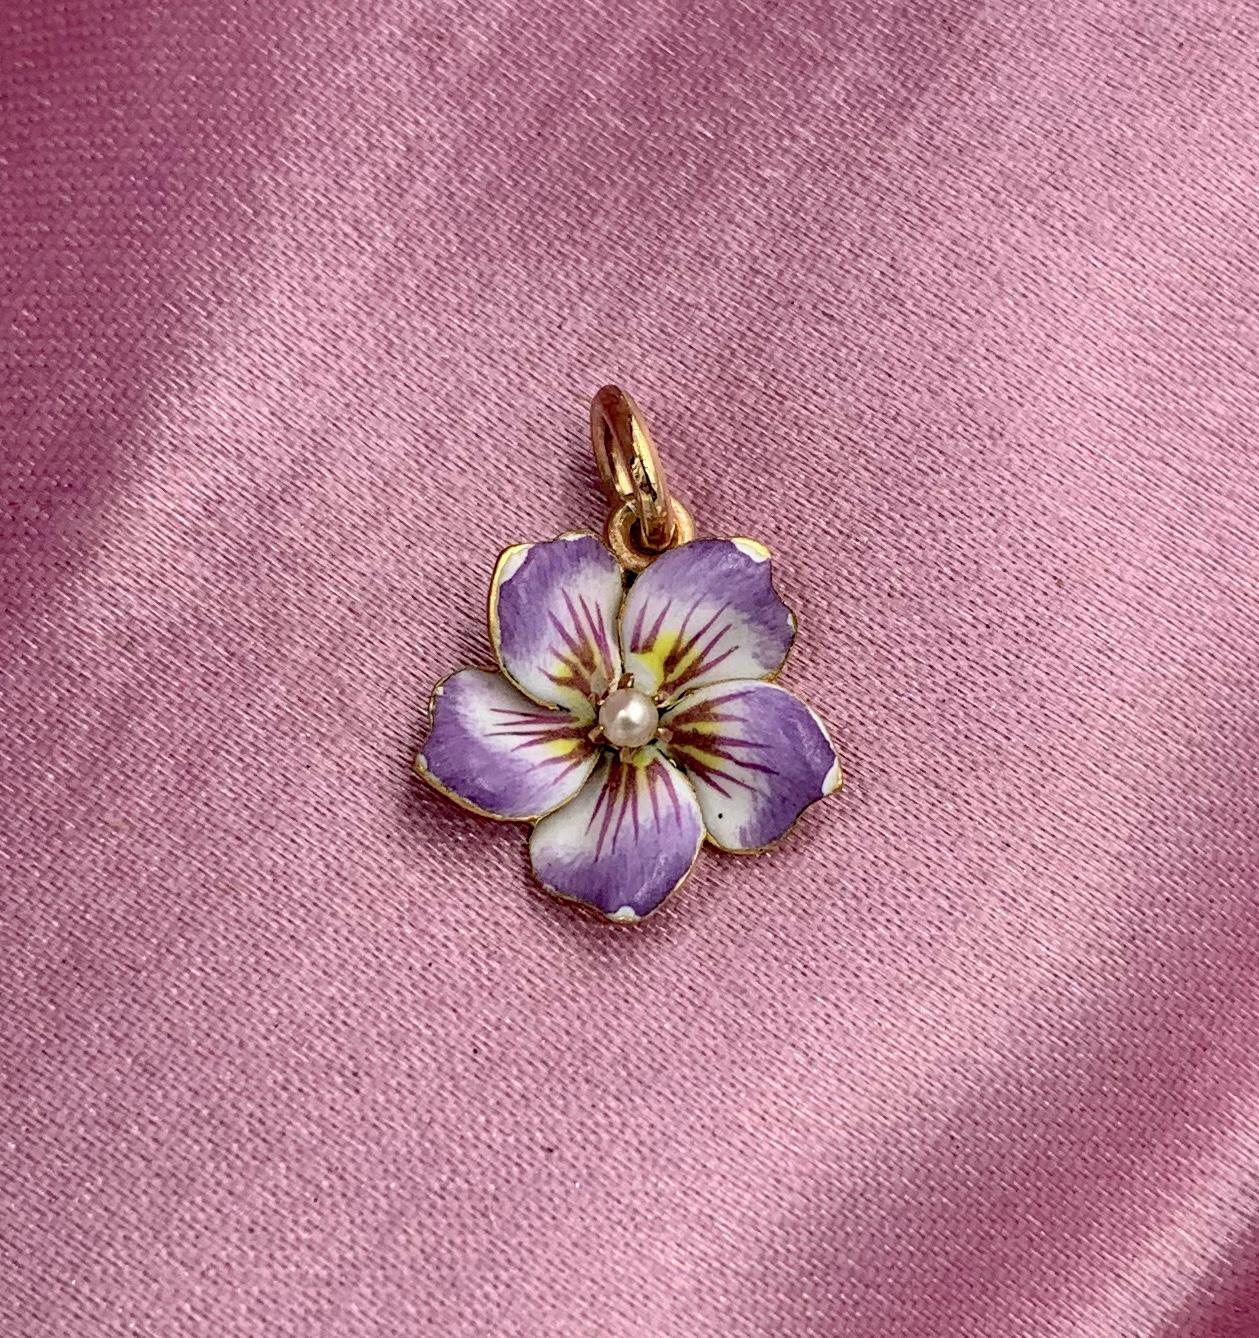 A VICTORIAN - ART NOUVEAU ENAMEL AND 18 KARAT GOLD LAVALIERE PENDANT IN THE FORM OF A PANSY FLOWER .  THE PENDANT IS SO STUNNING WITH THE MOST DELICATE MULTI-HUED PURPLE LAVENDER ENAMEL OF THE HIGHEST QUALITY SET WITH A LOVELY PEARL IN THE BEAUTIFUL